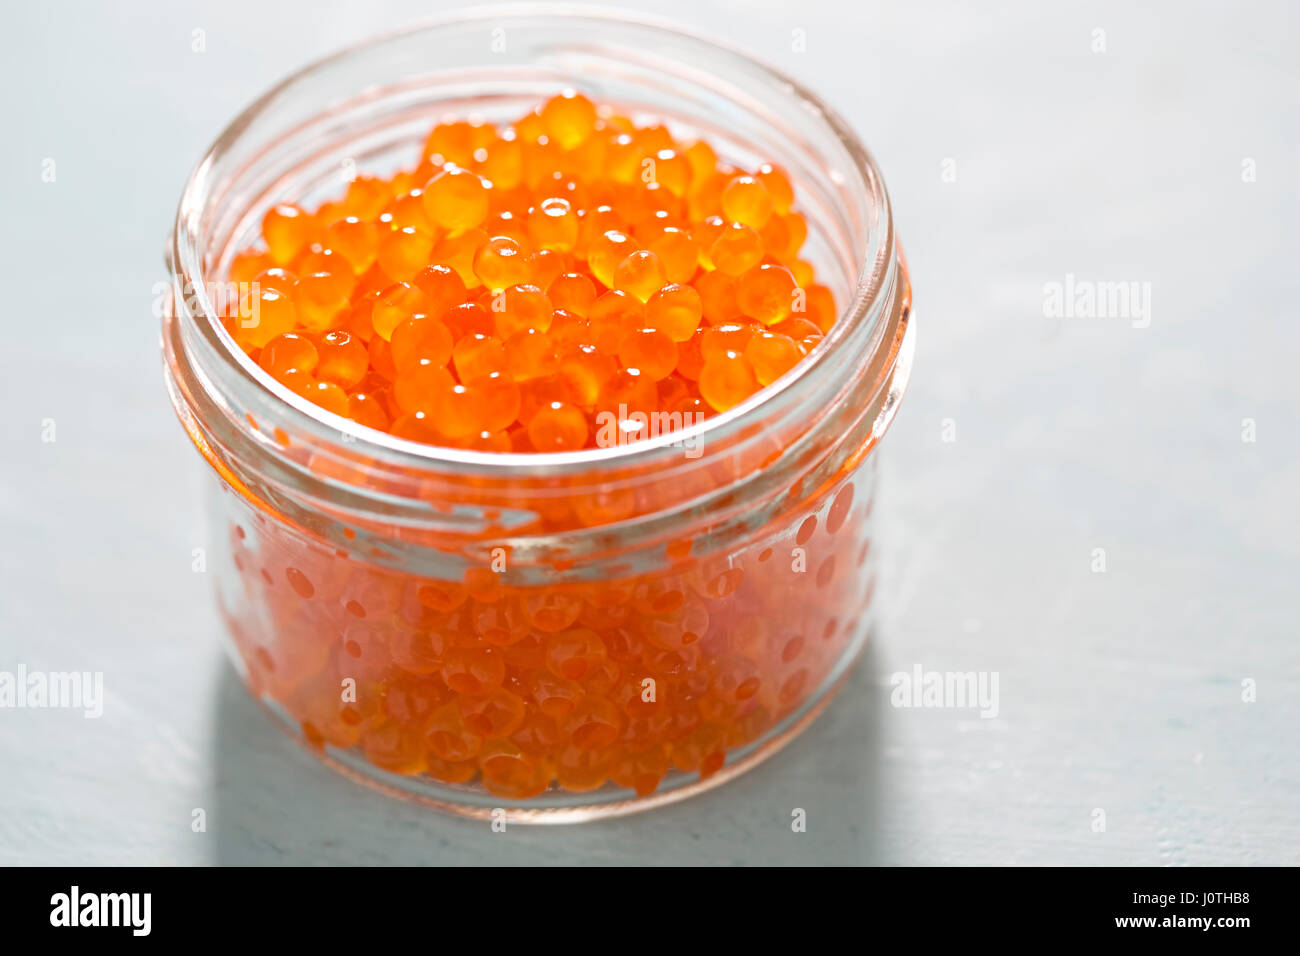 Trout caviar in jar on blue background Stock Photo